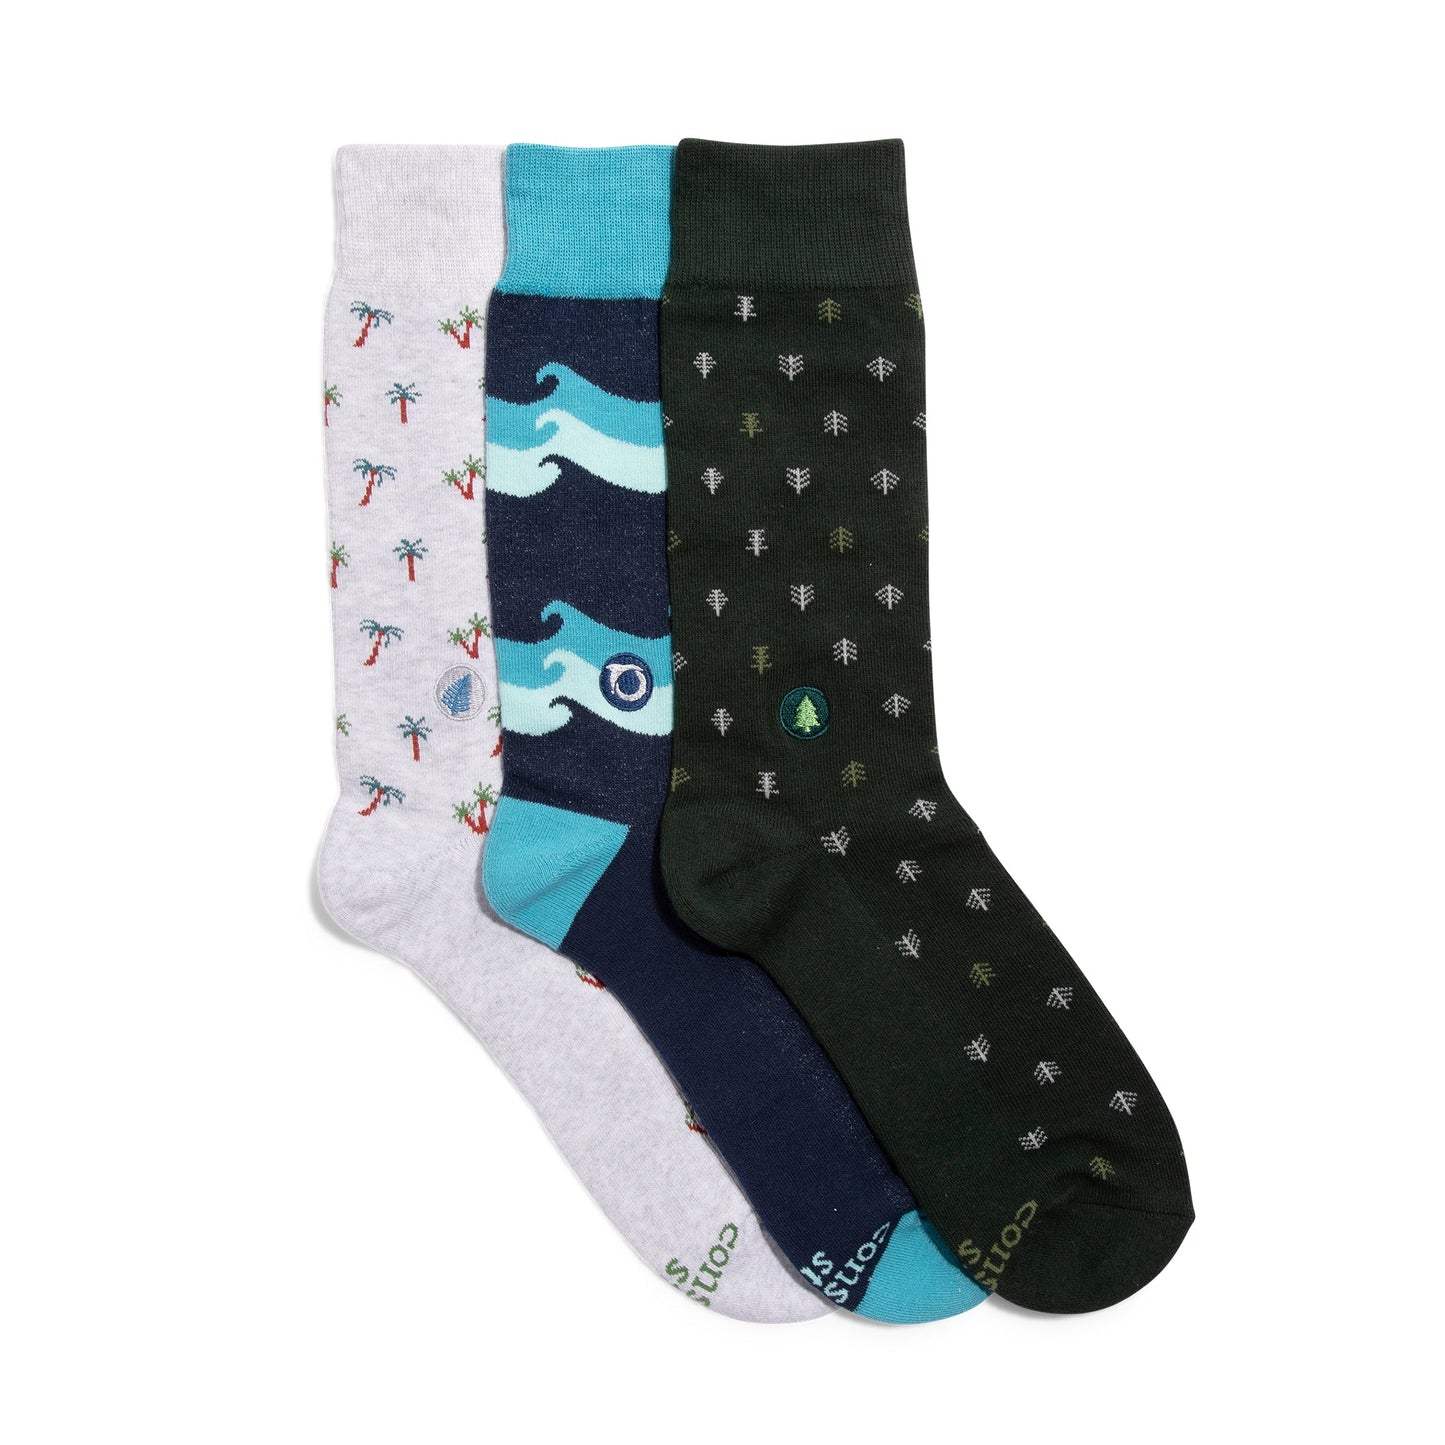 Conscious Step - Gift Box: Socks that Protect the Planet